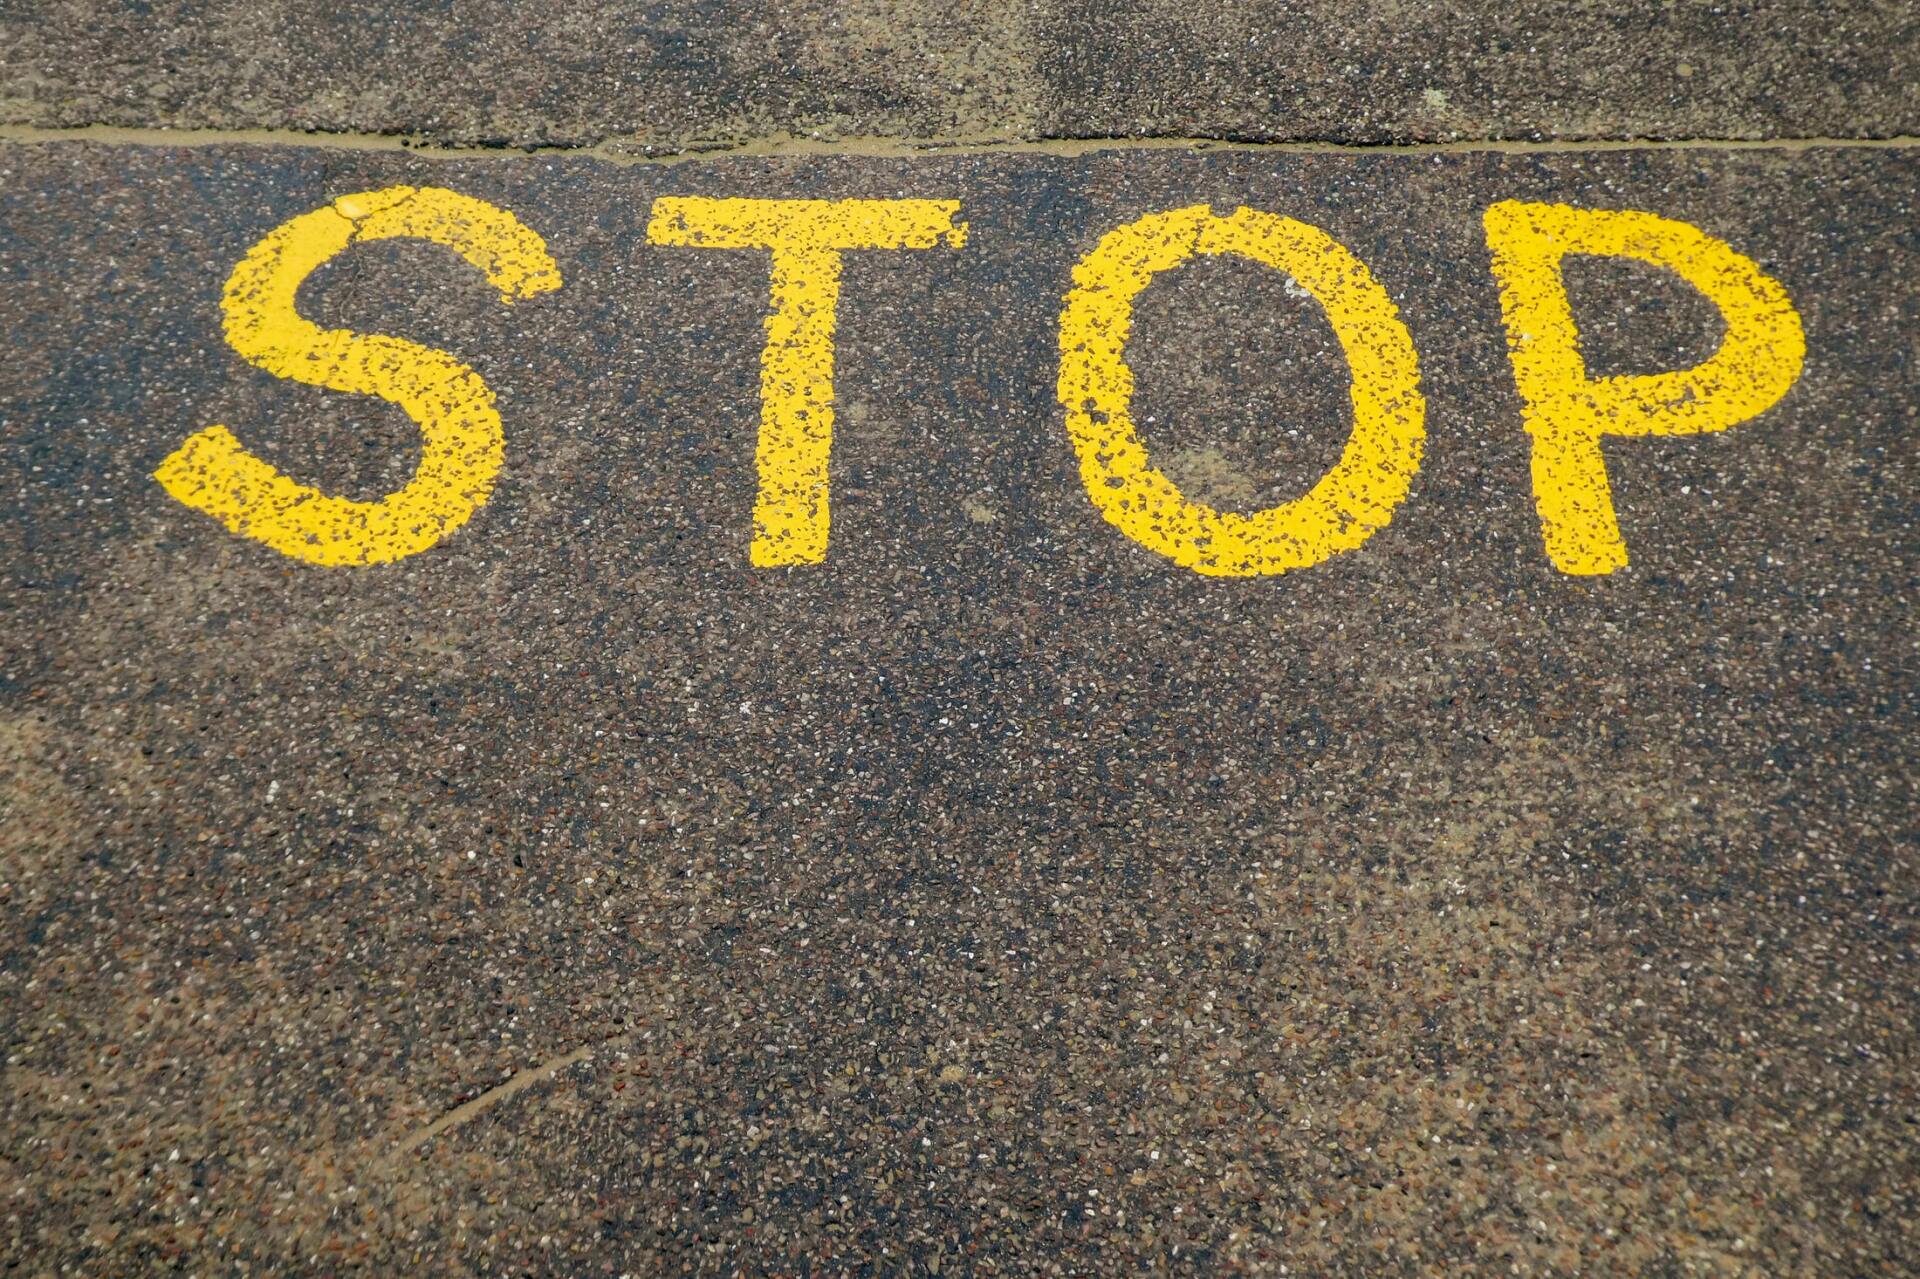 the word stop is painted in yellow on the ground